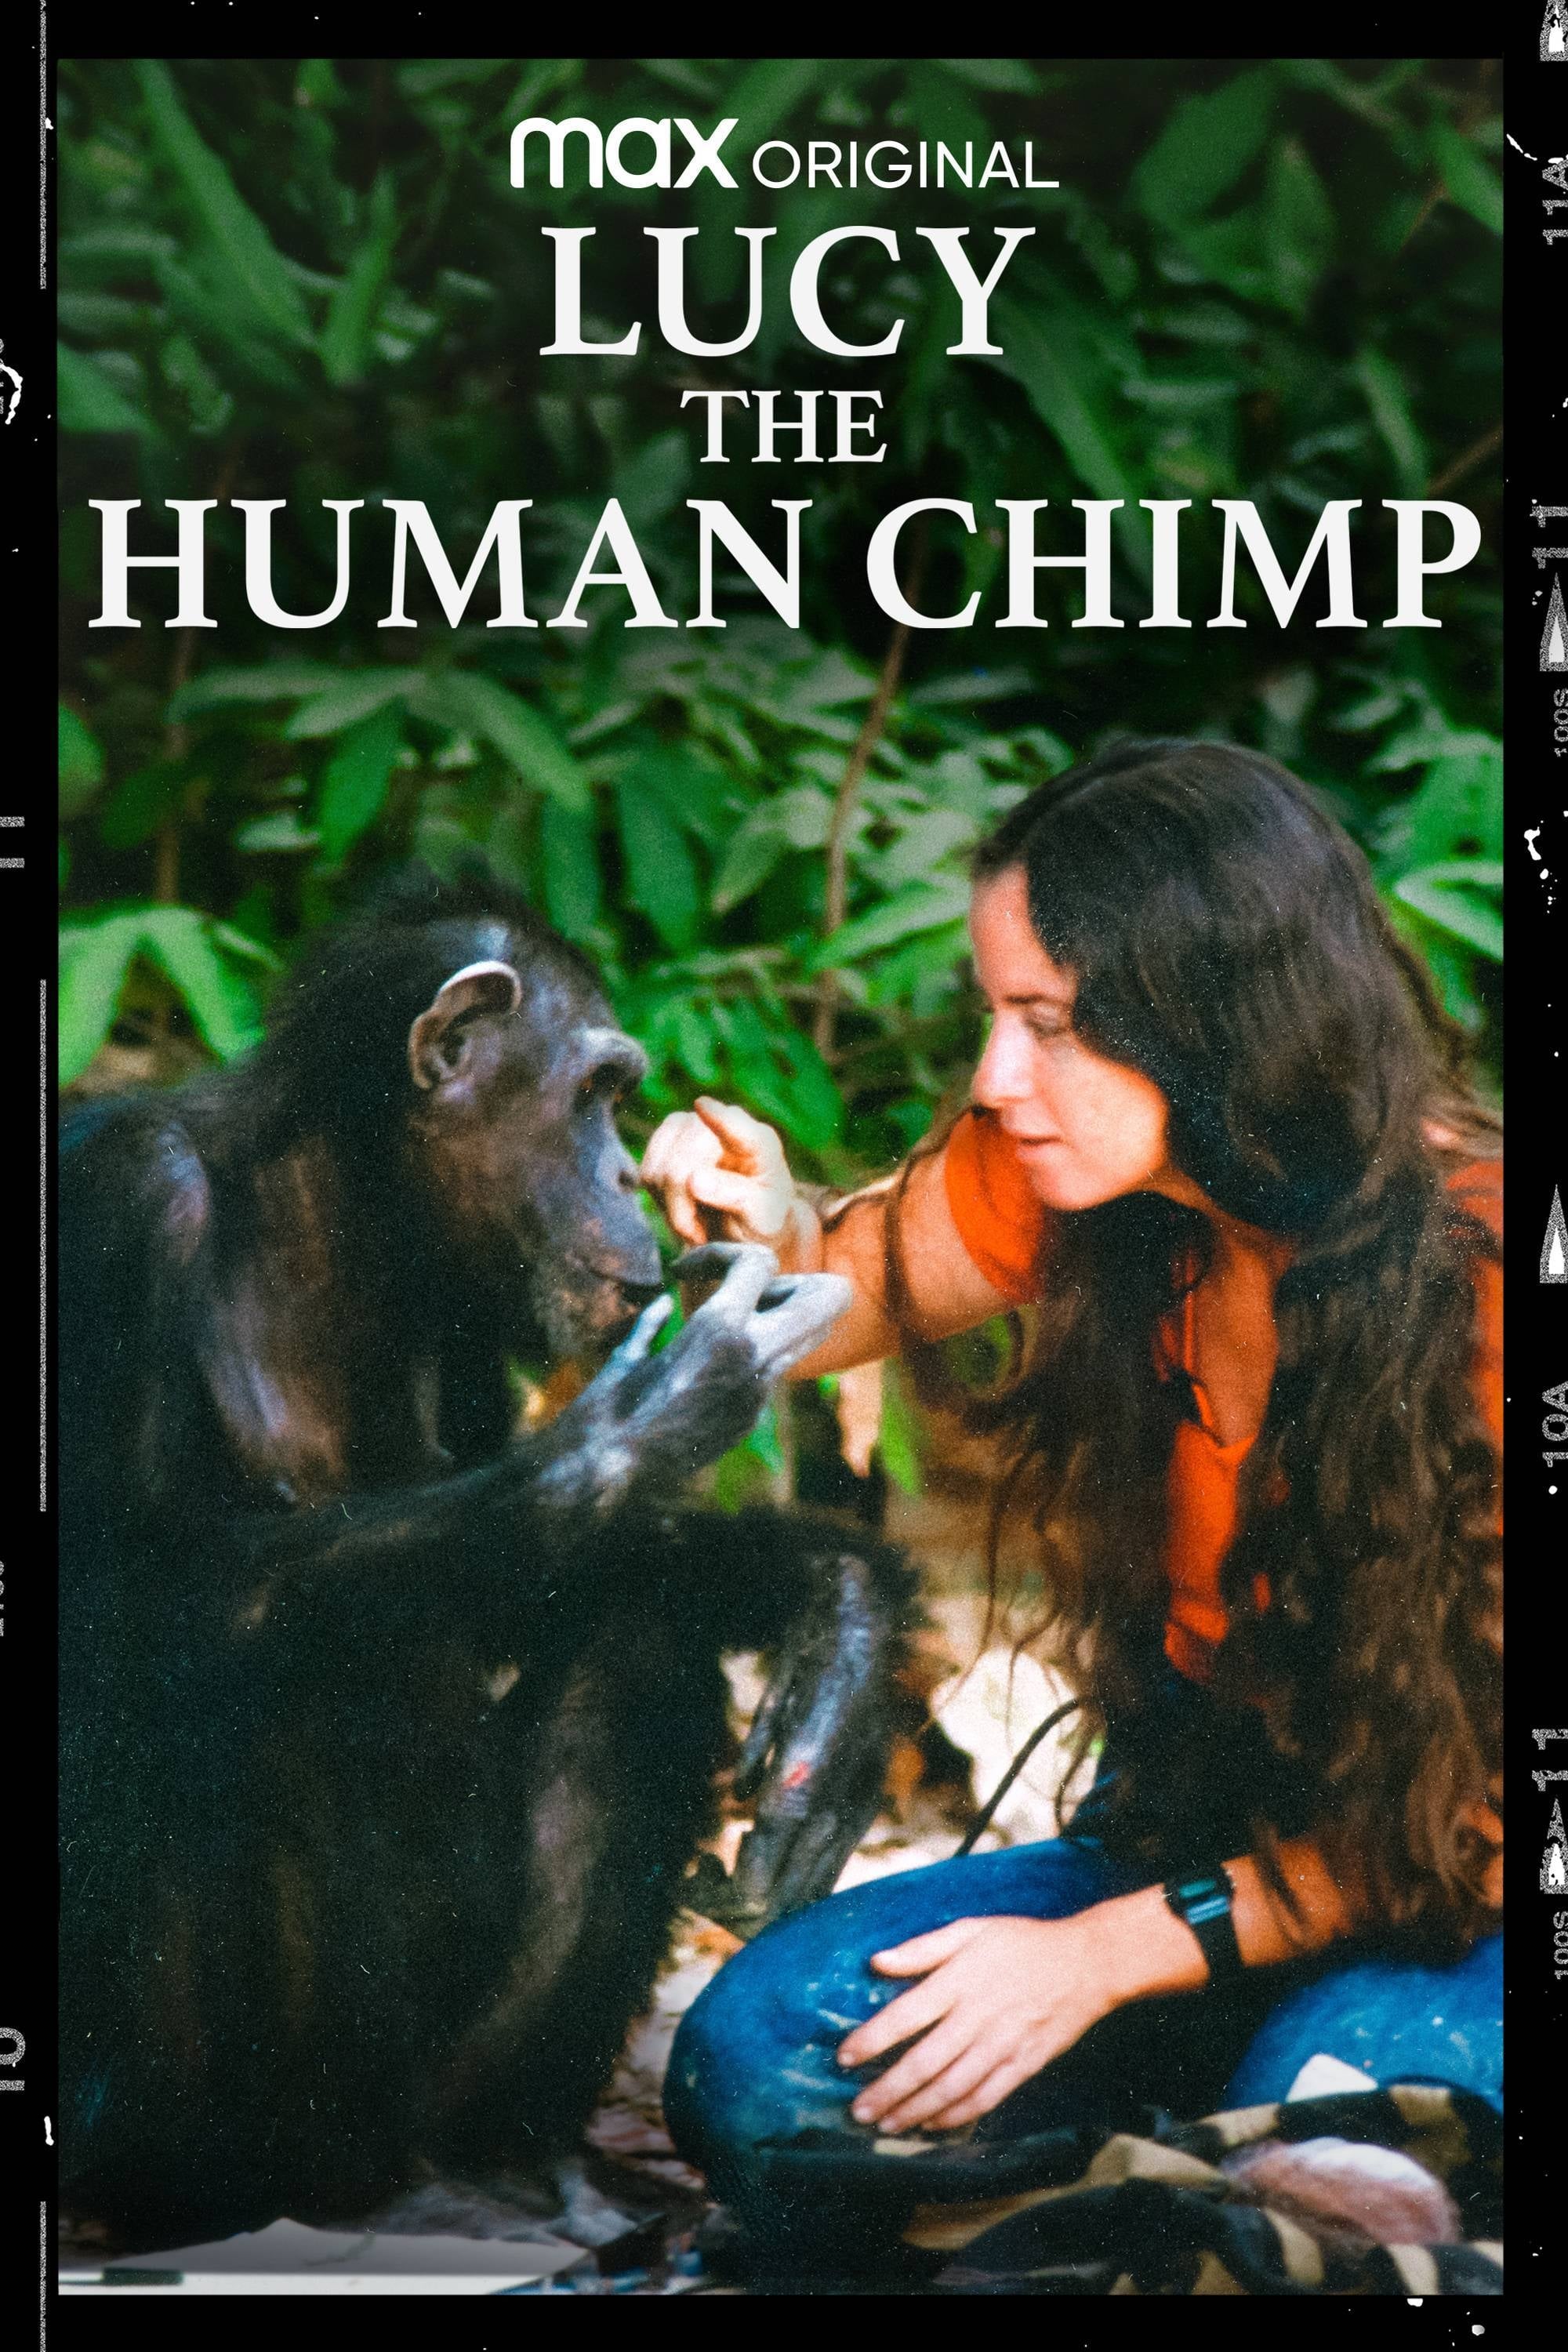 Lucy, the human chimp